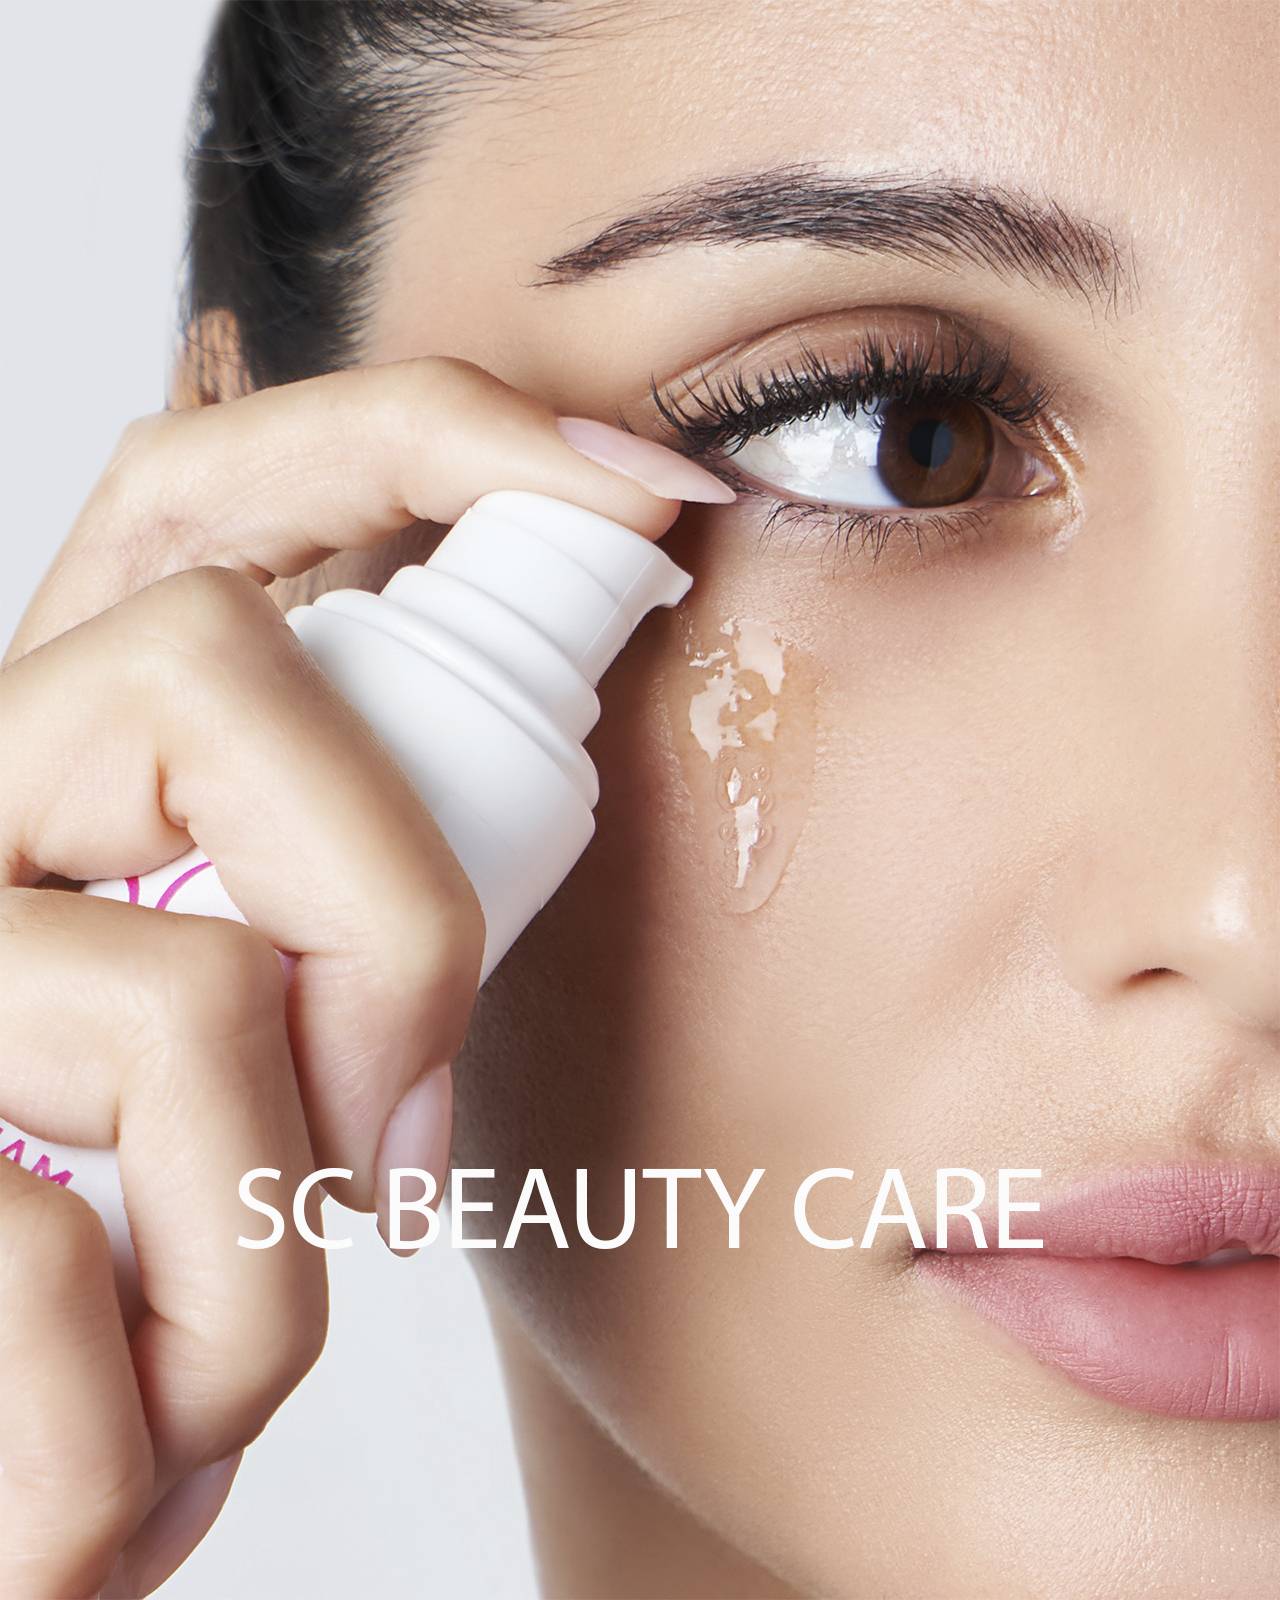 SC BEAUTY CARE By Andrea Reina